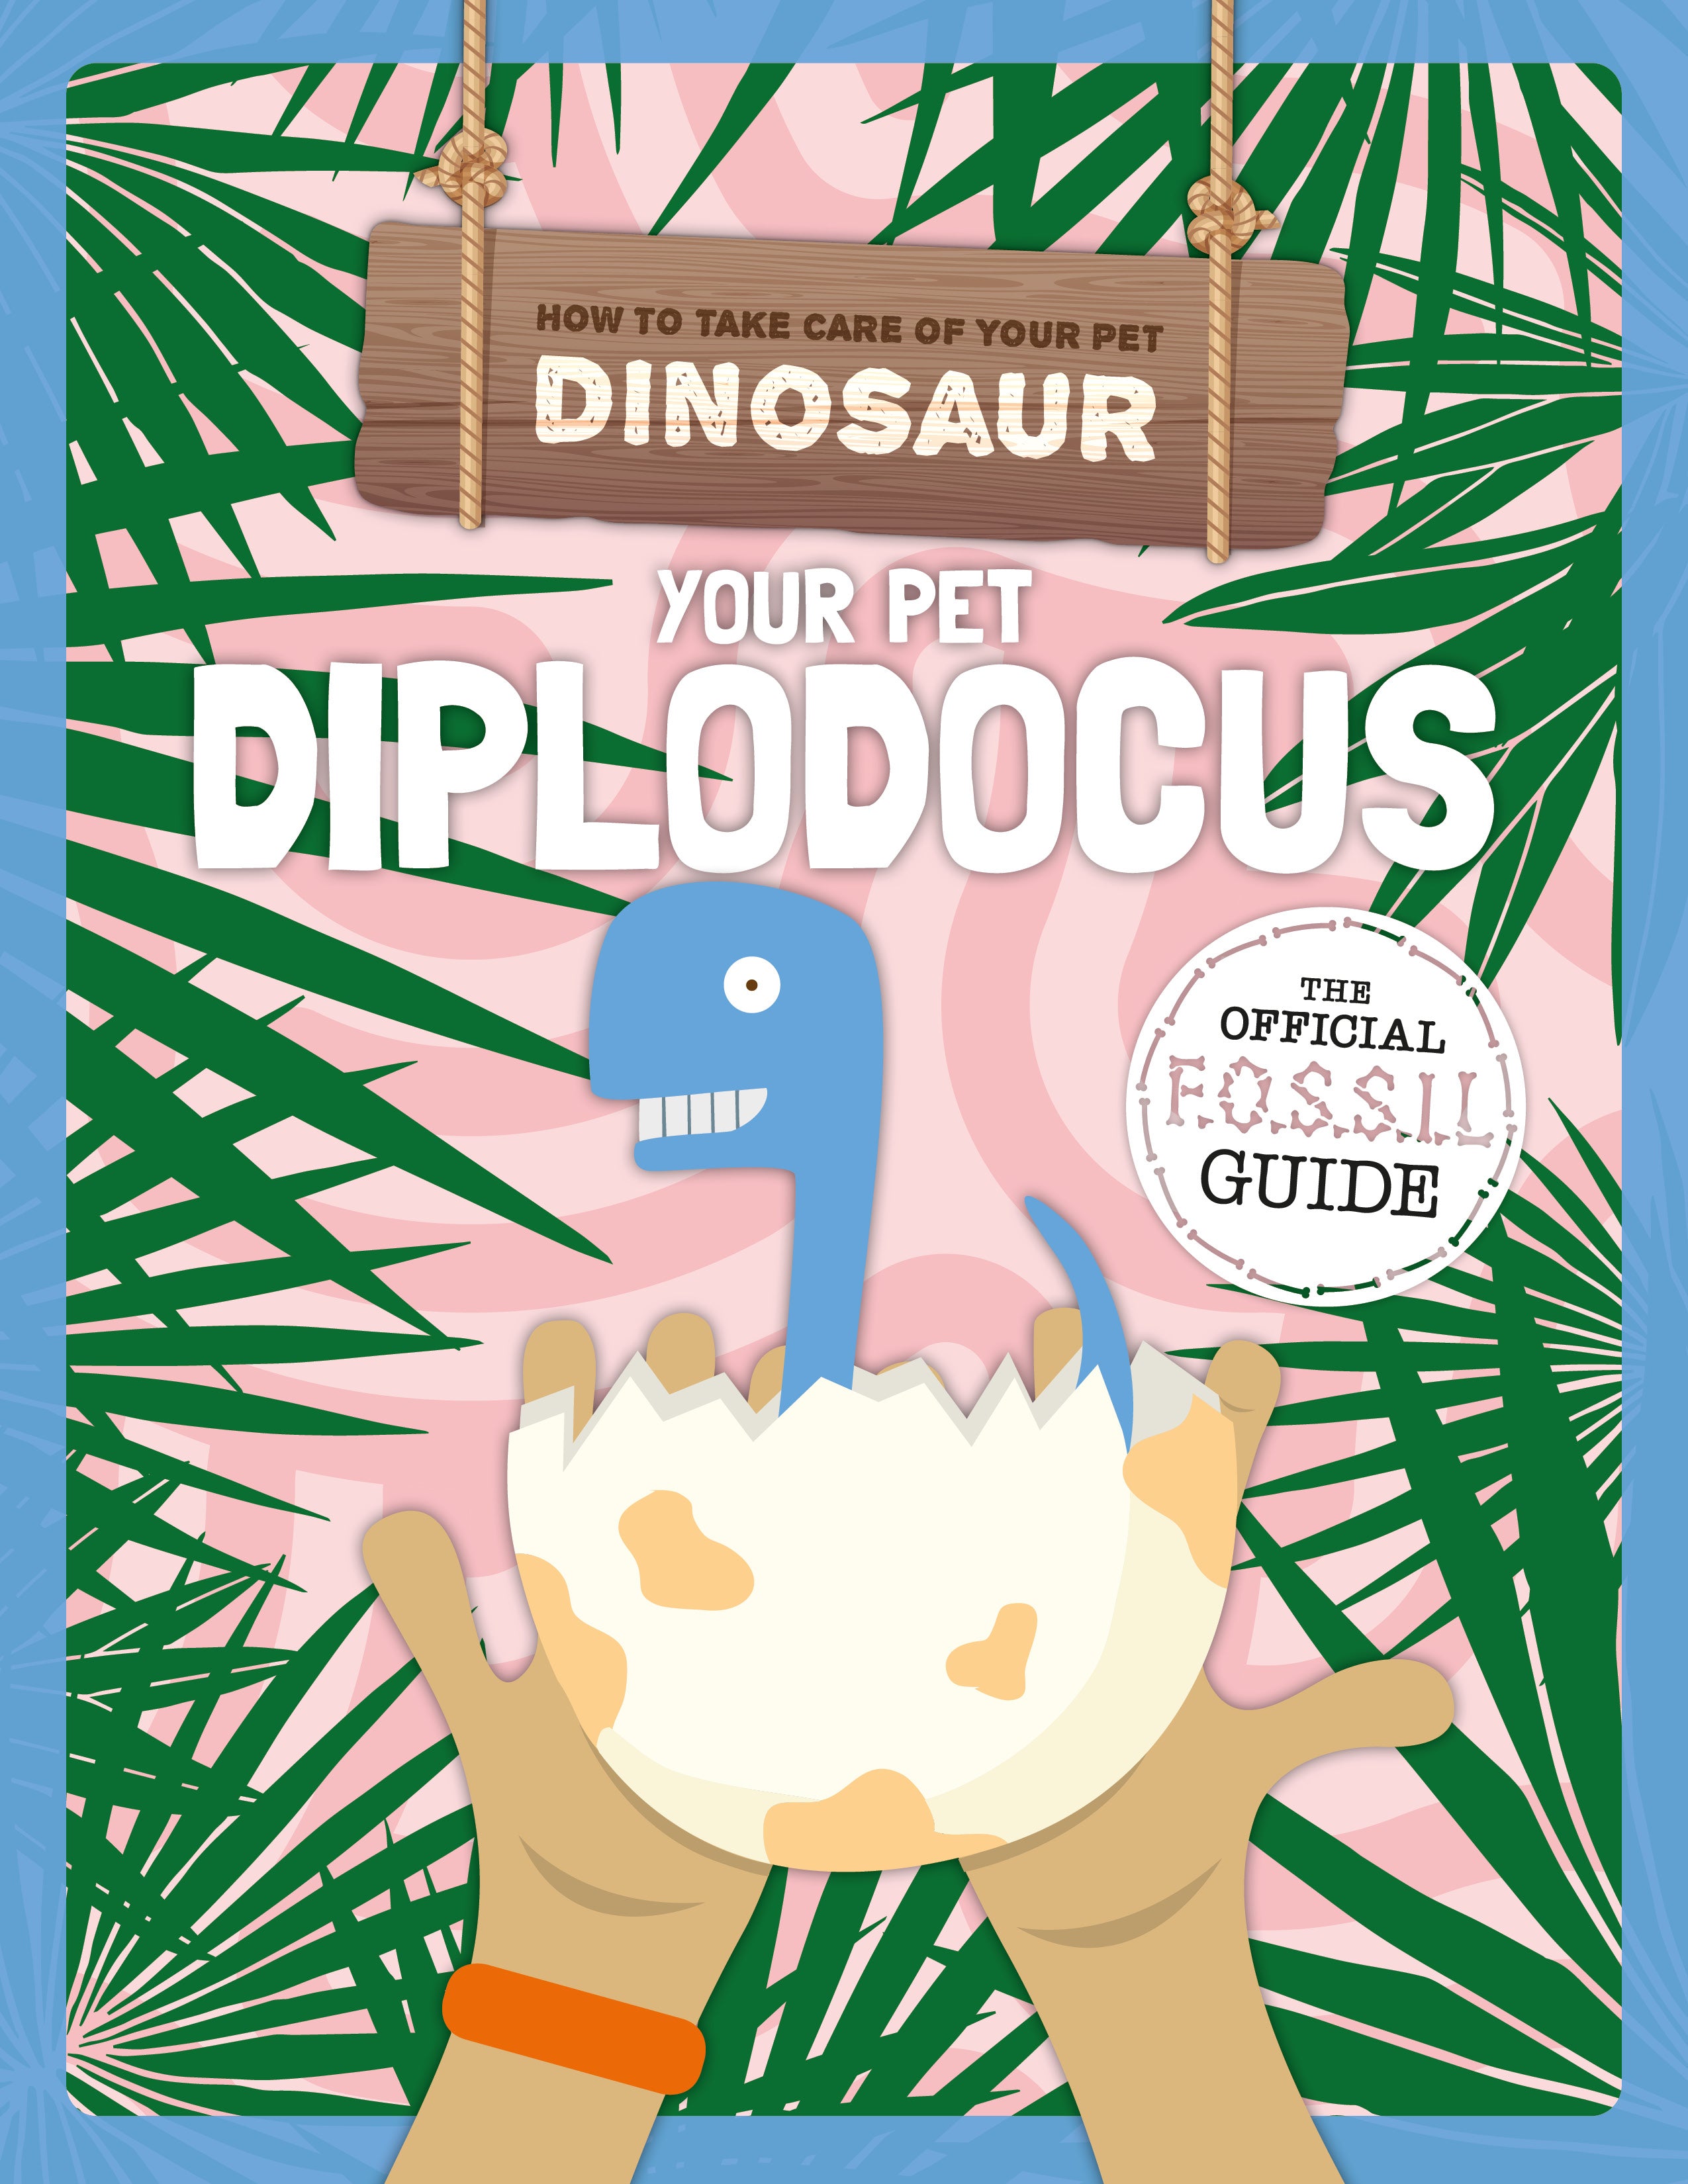 How to Take Care of Your Pet Dinosaur - Paperbacks